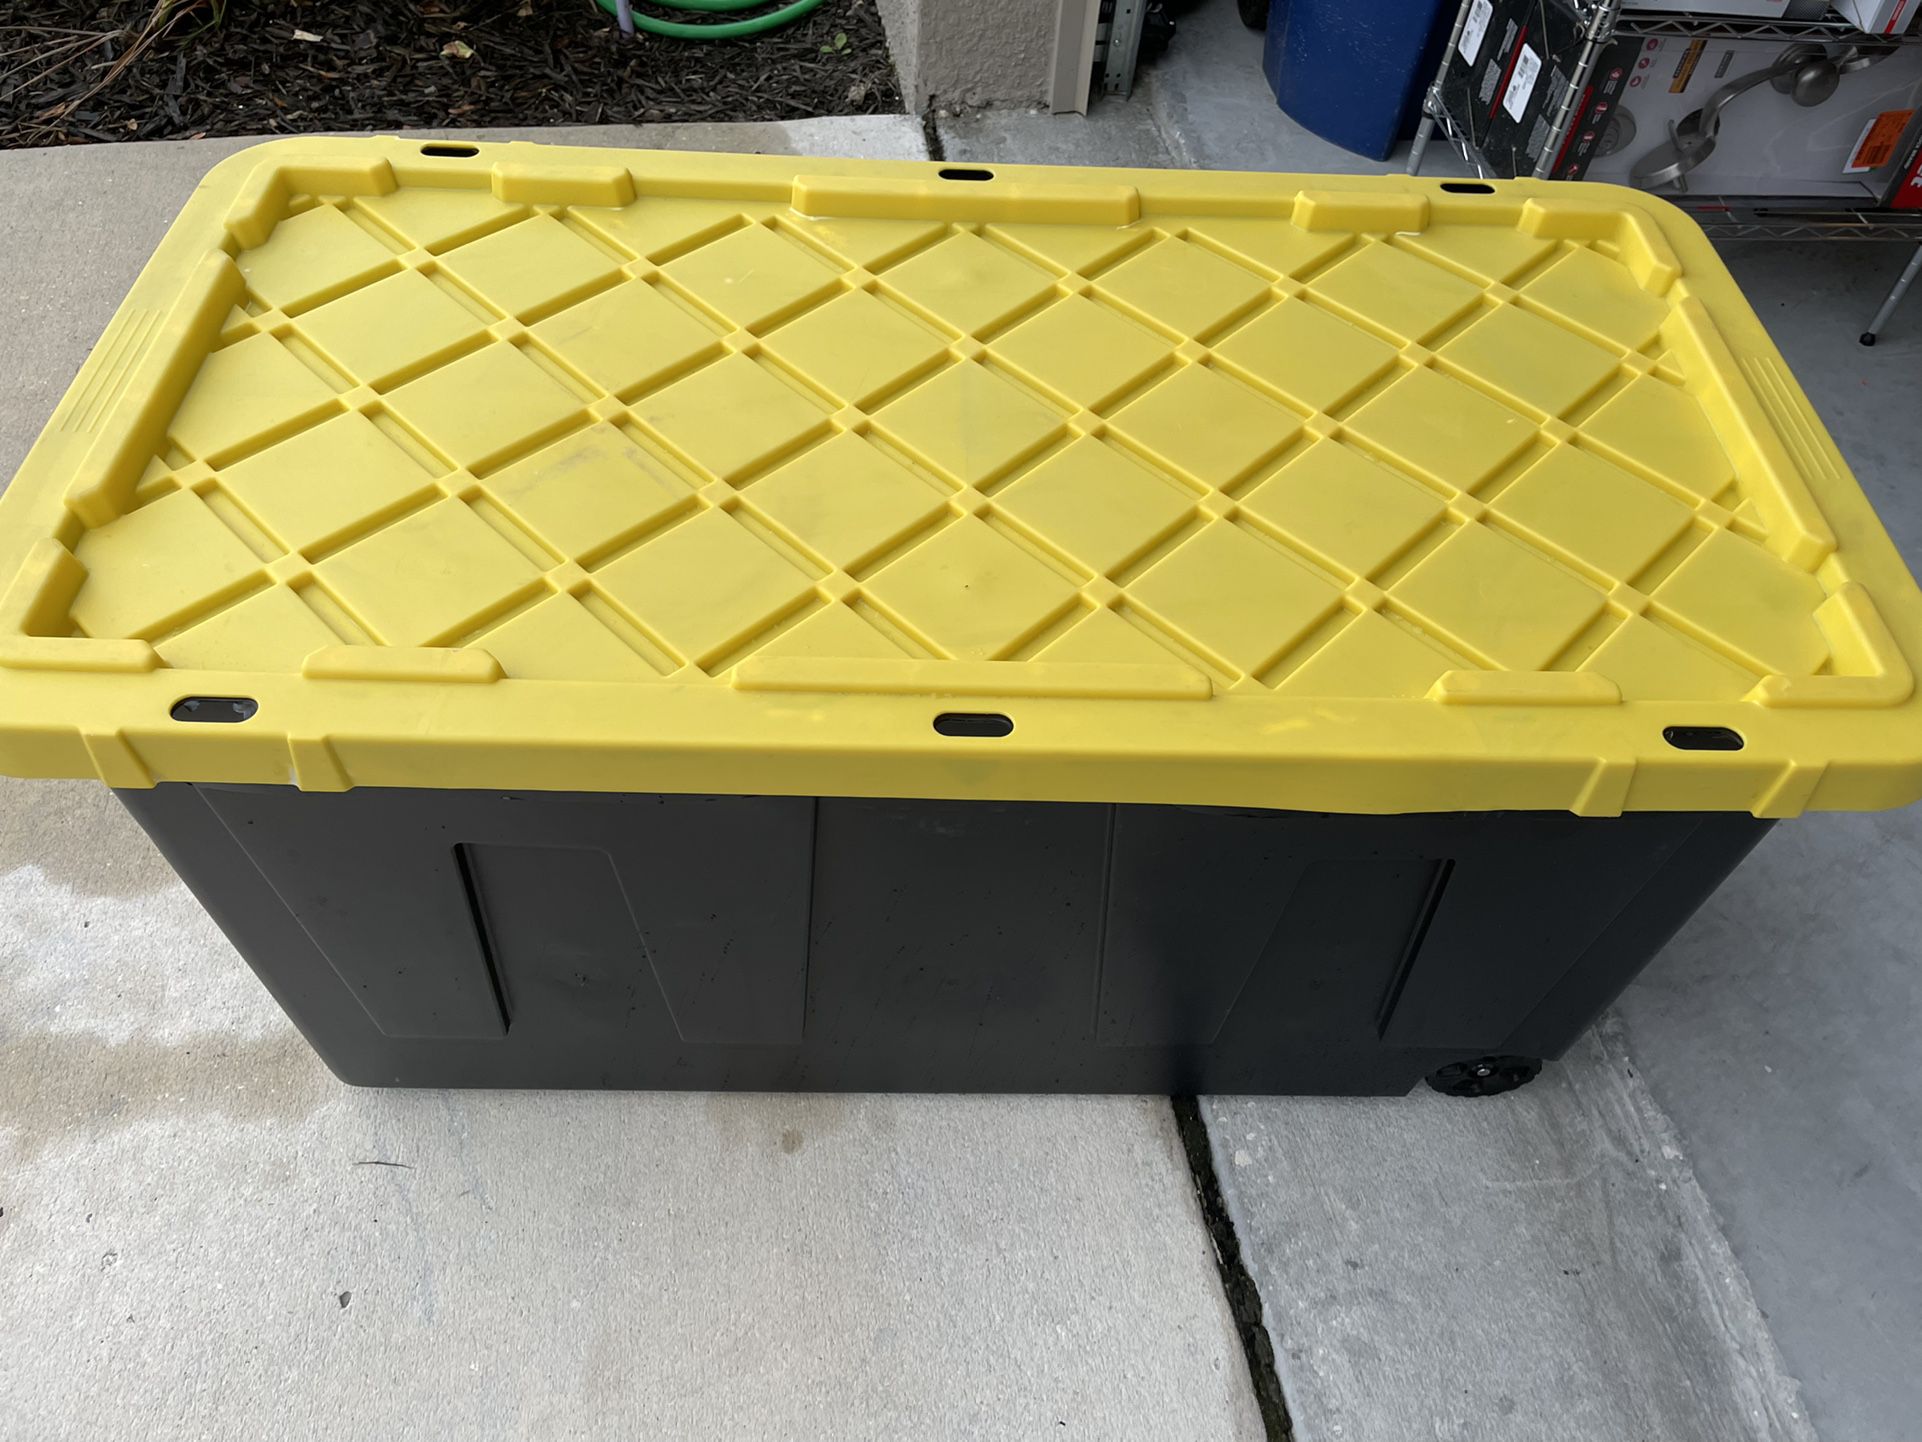 70 Gal. Tough Storage Tote with Wheels in Black with Yellow Lid